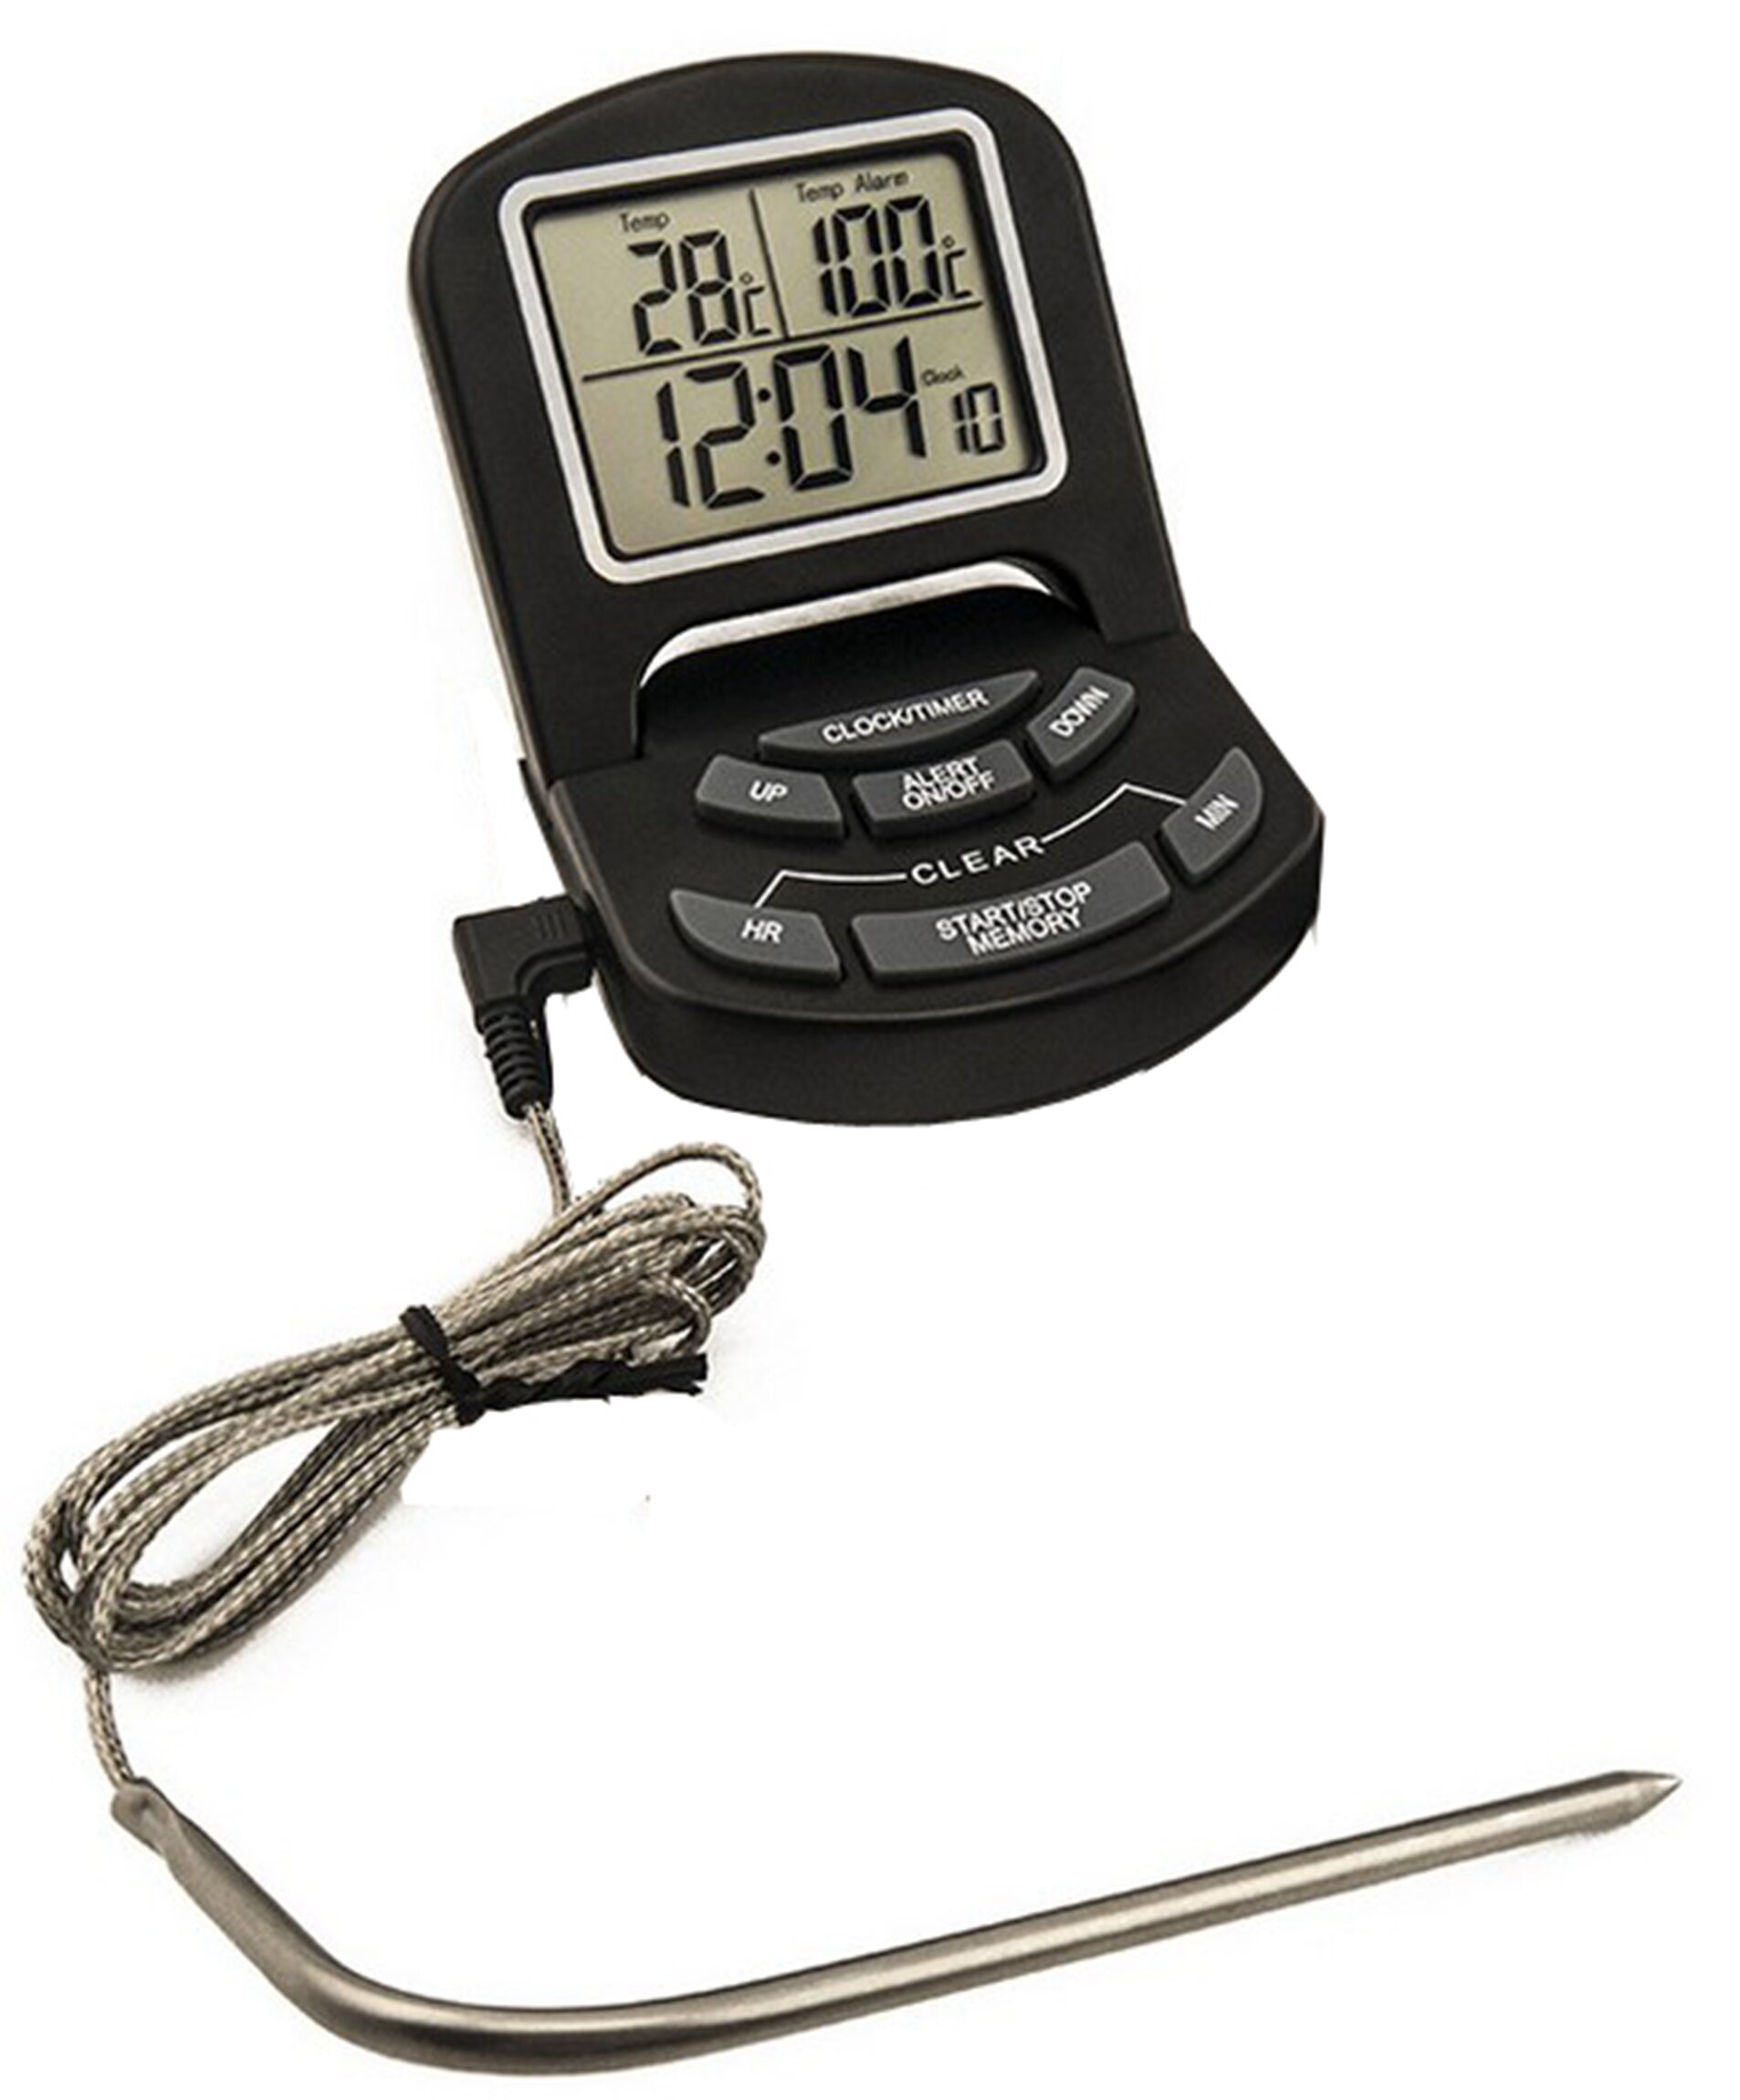 Fixturedisplays Digital Kitchen Probe For BBQ, Oven, Grill And Smoker With Timer Alarm 16810 | Wayfair